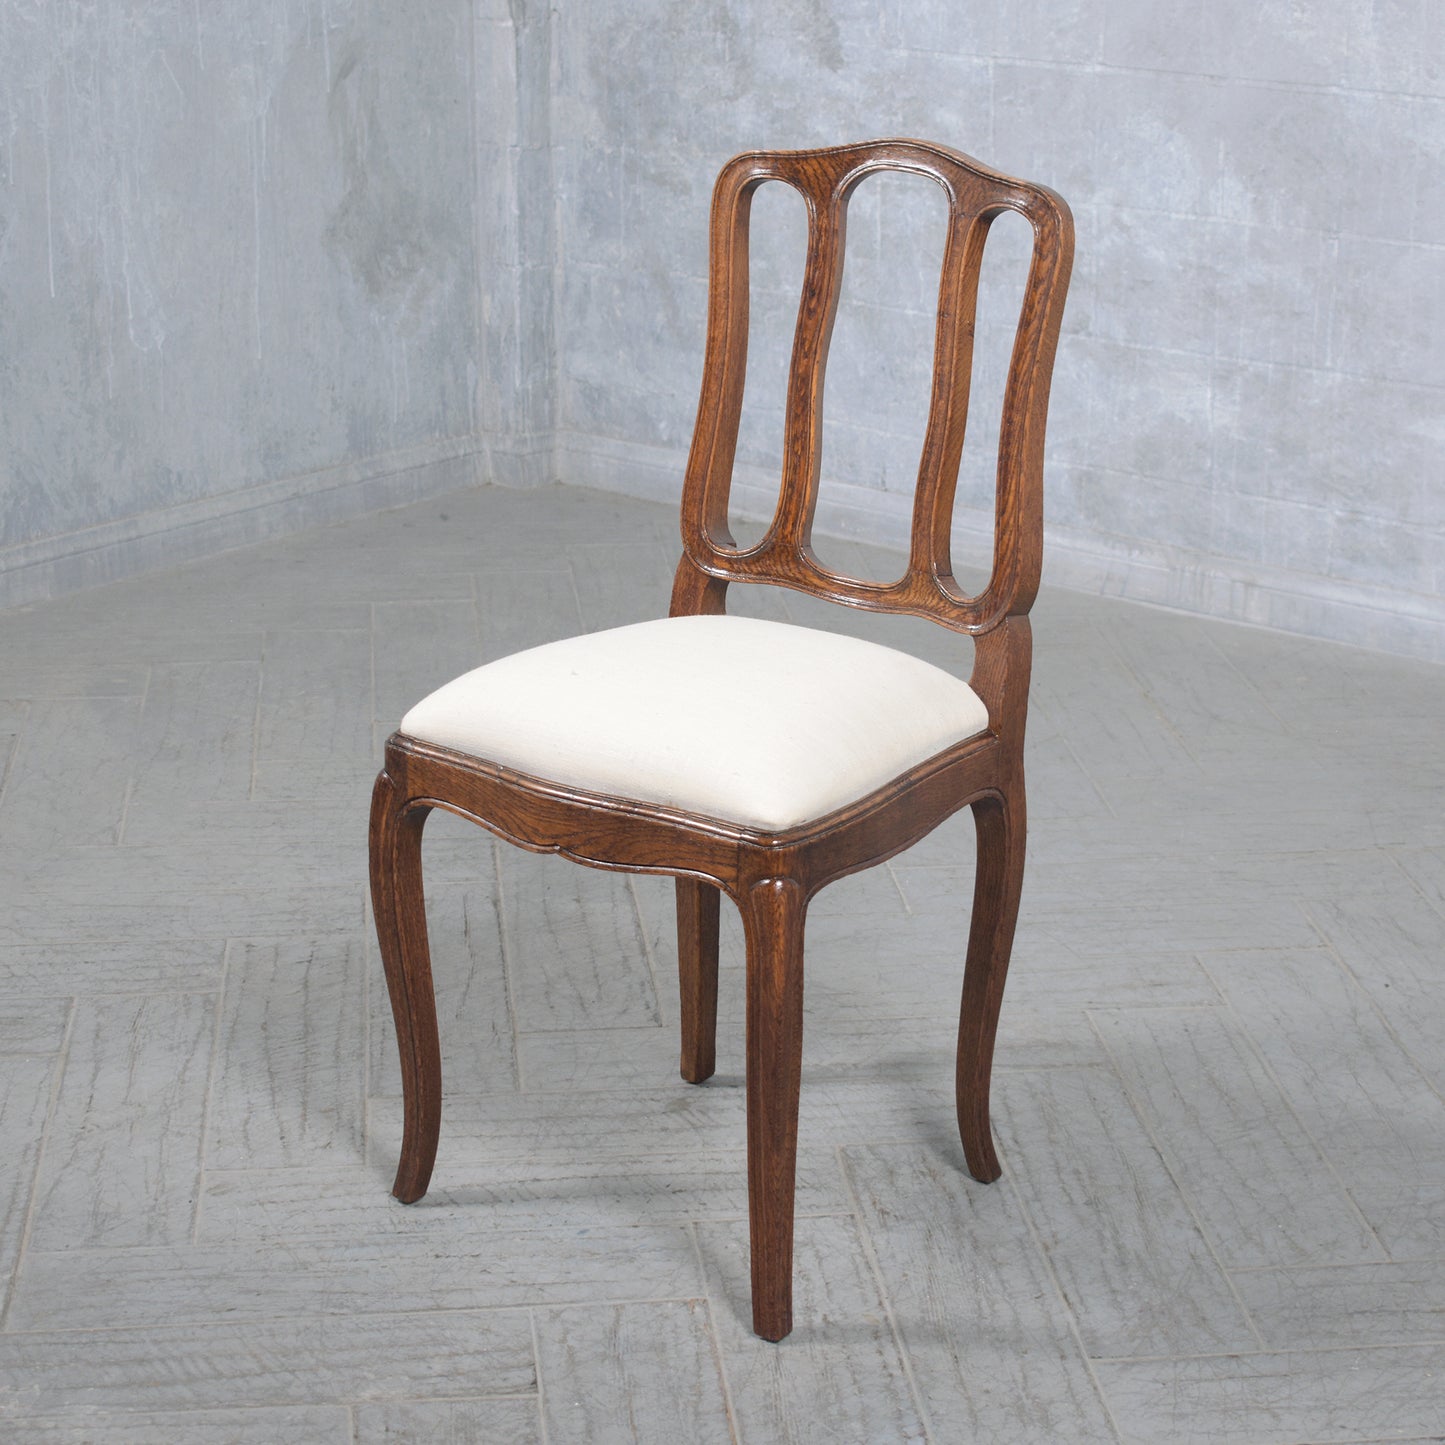 Set of Antique French Dining Chairs in Walnut & Ivory Linen: Elegantly Restored